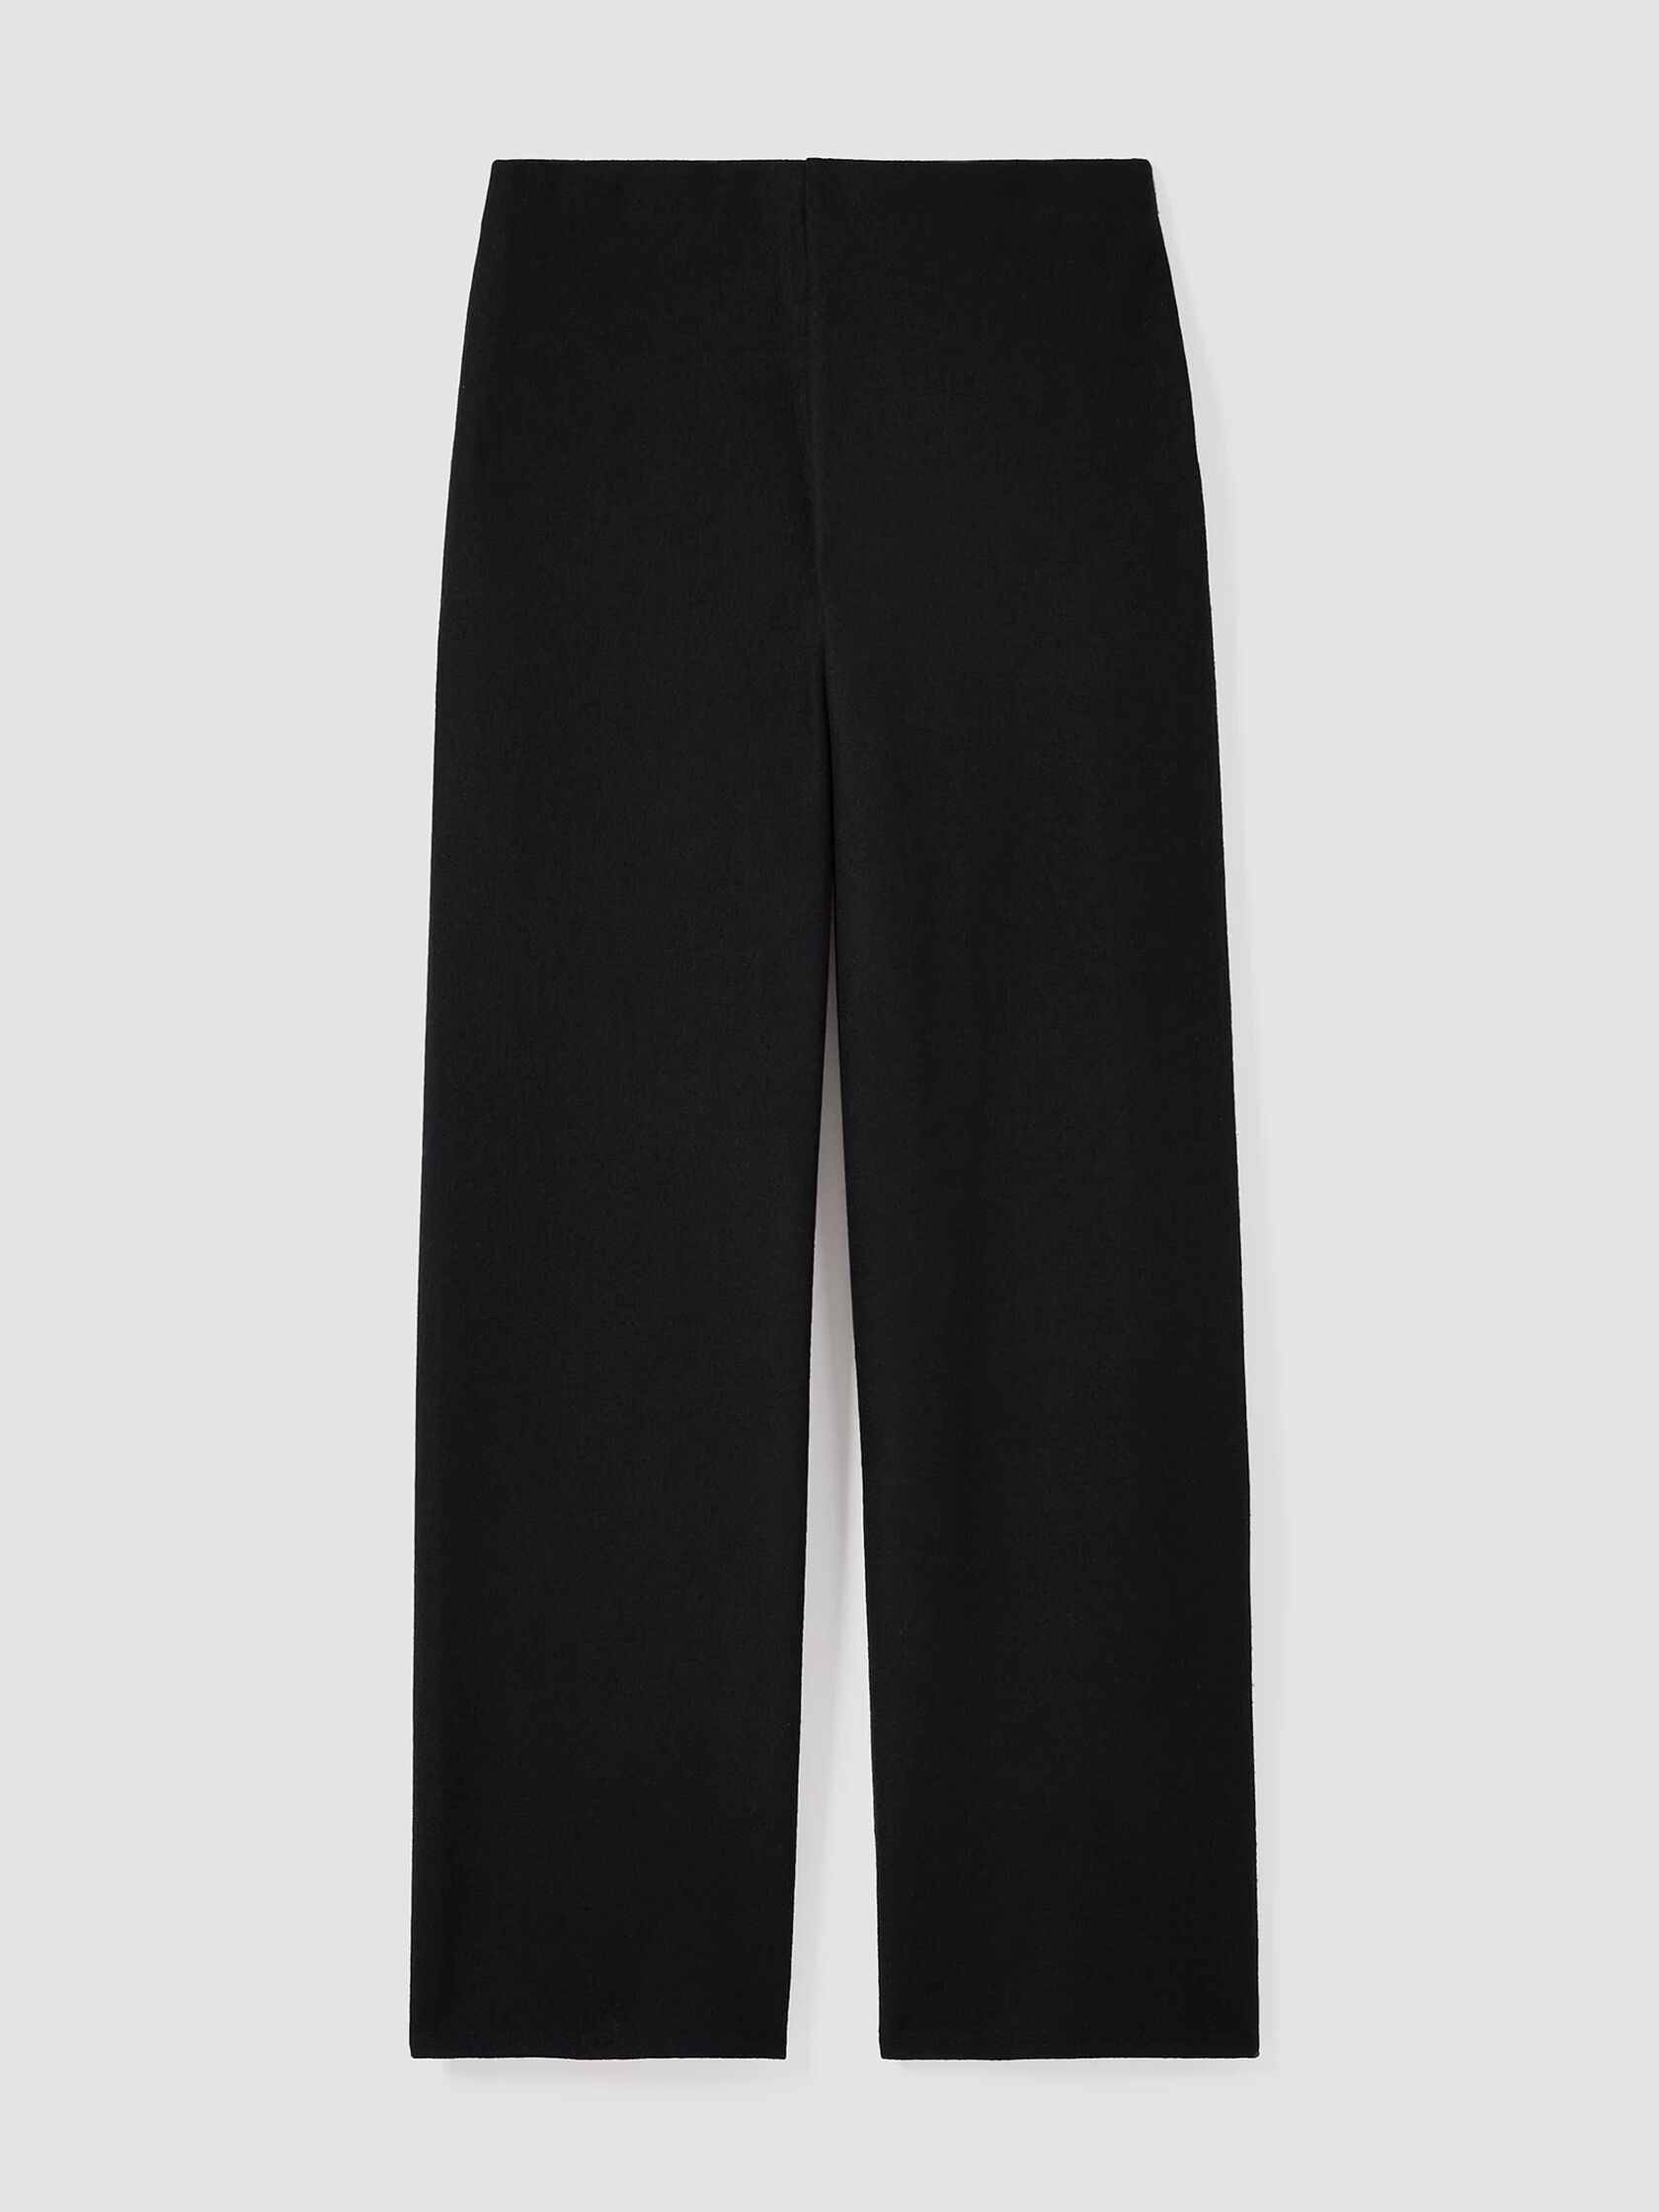 Boiled Wool Jersey Straight Pant | EILEEN FISHER